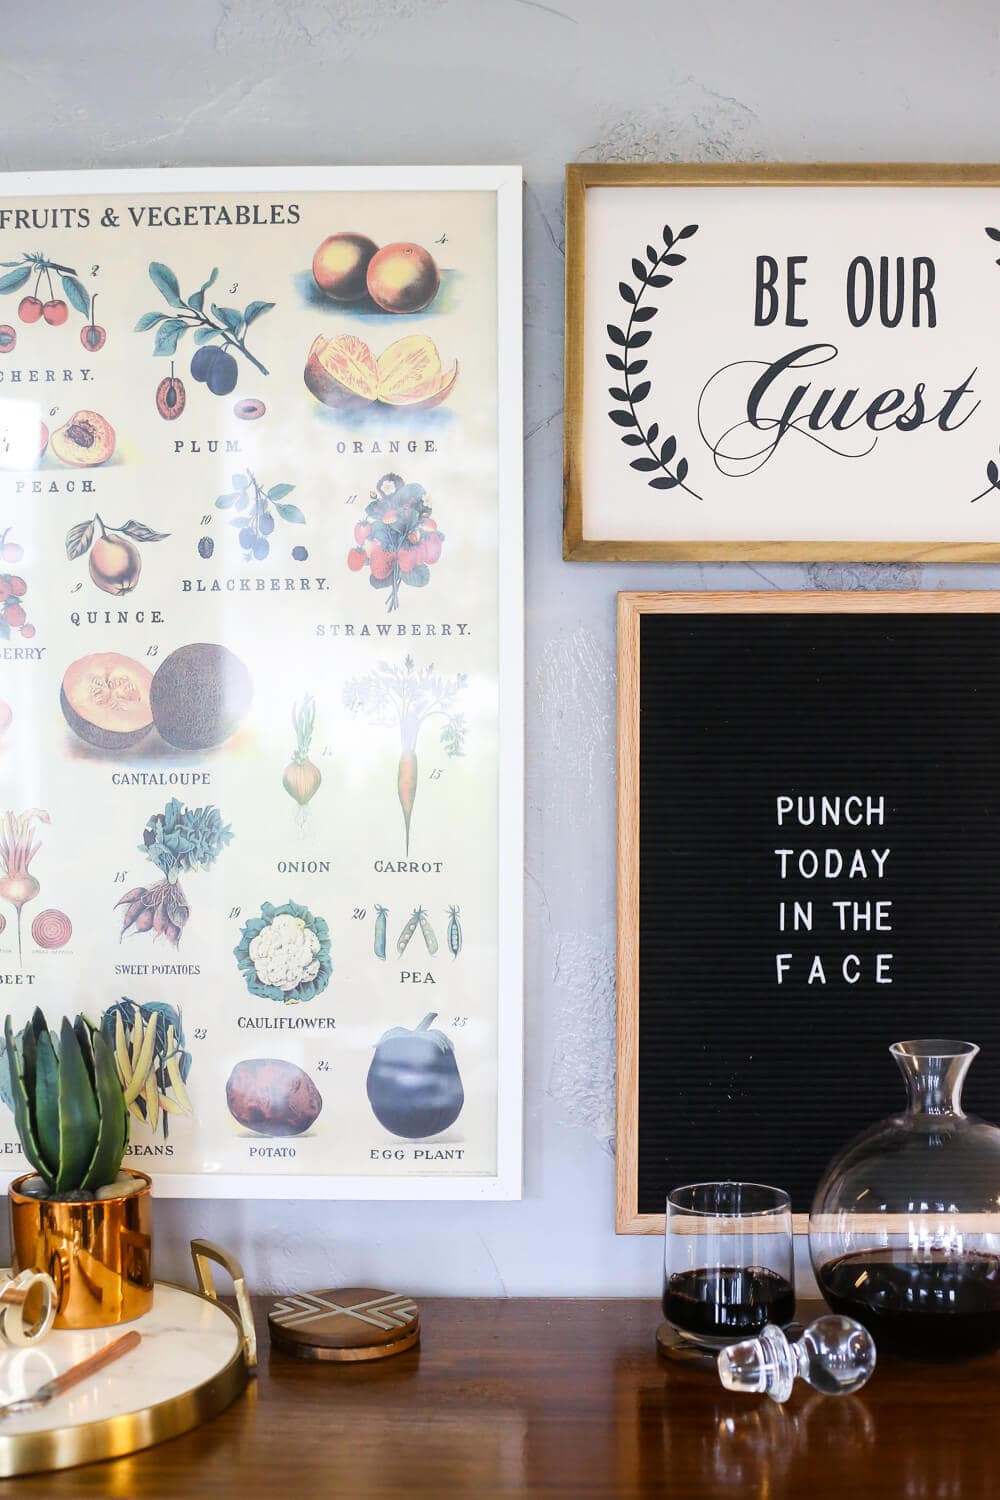 Gorgeous gallery wall inspiration, ideas for what to hang above your bar cart, felt letter board inspiration